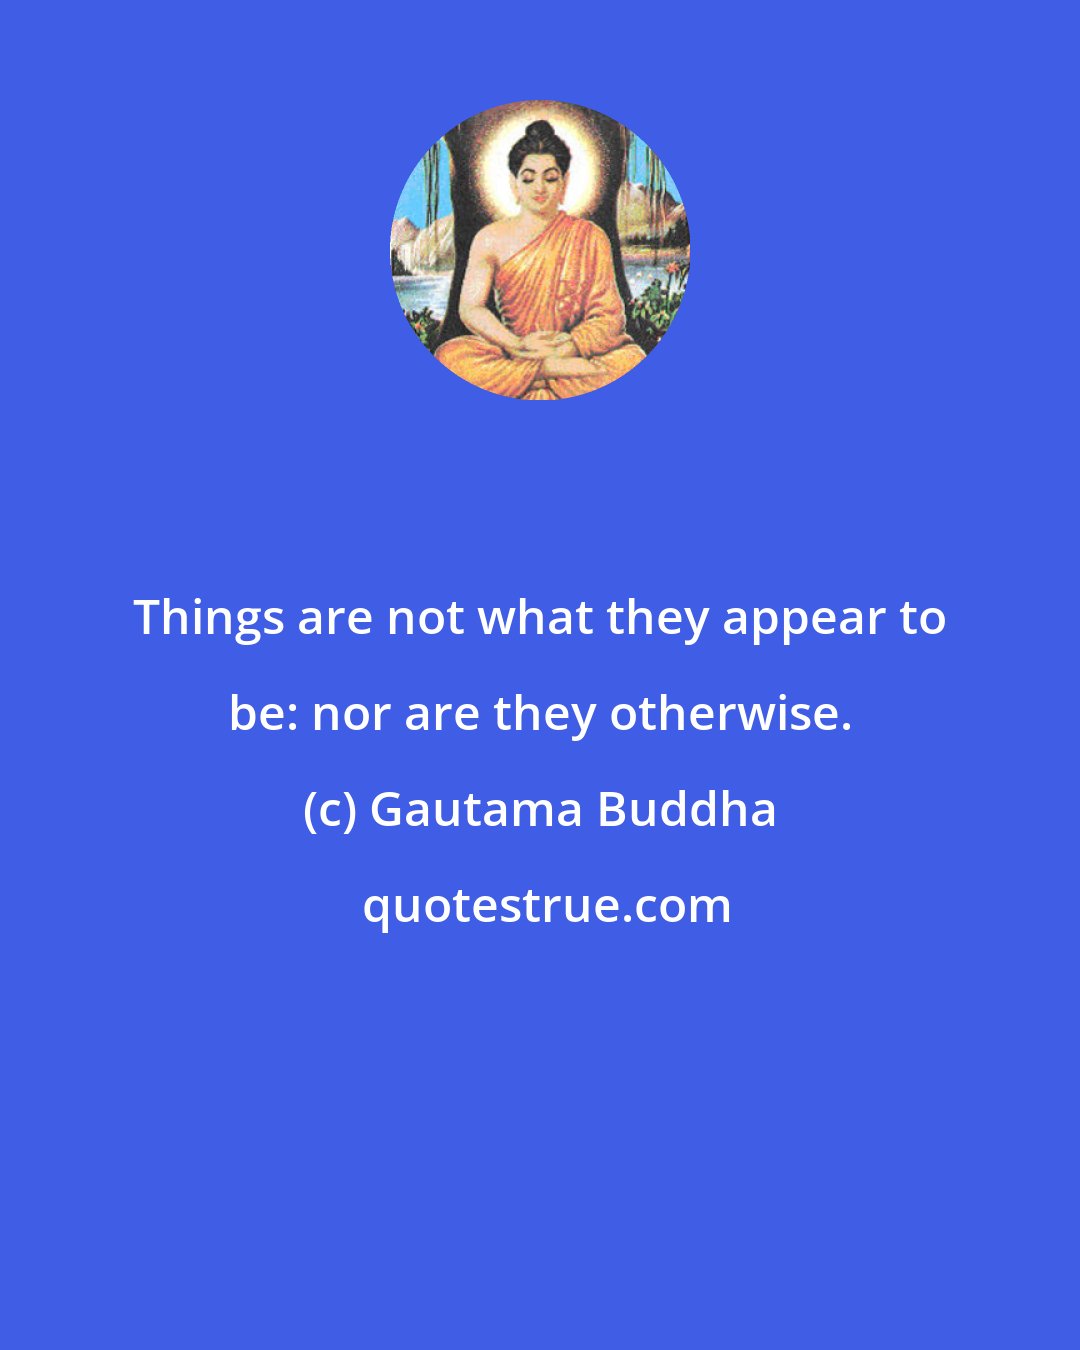 Gautama Buddha: Things are not what they appear to be: nor are they otherwise.